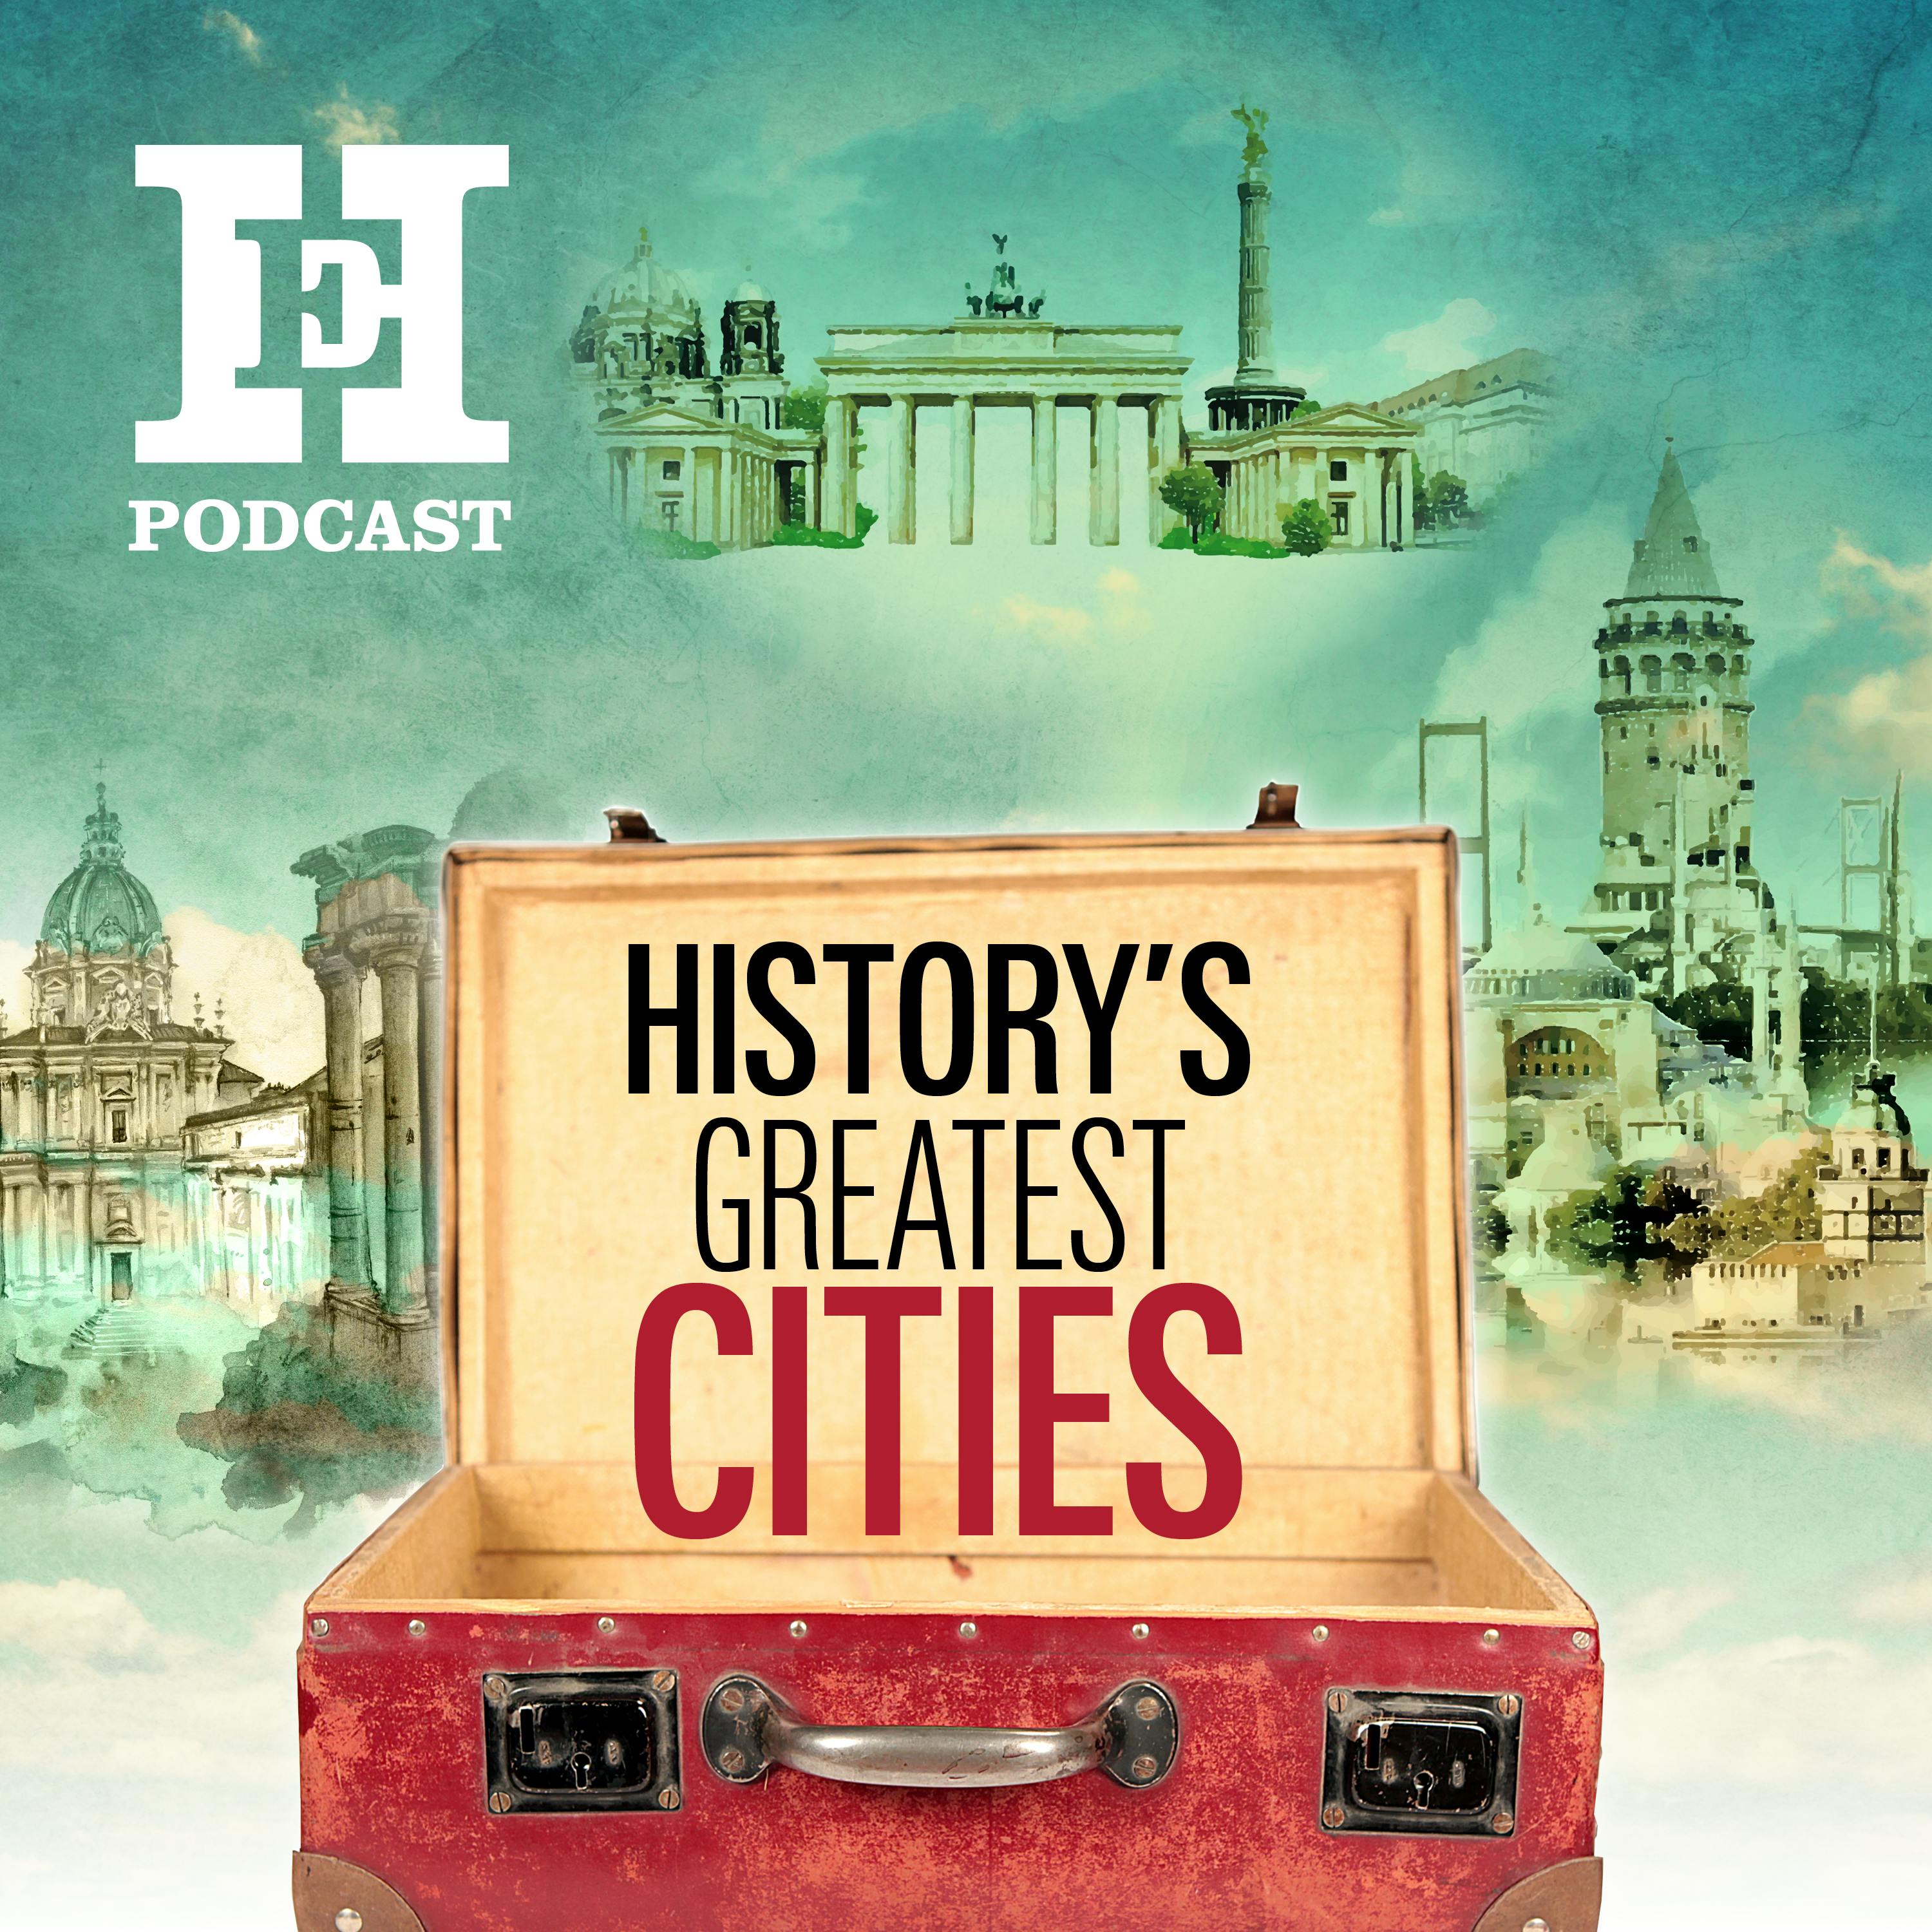 History's greatest cities podcast show image